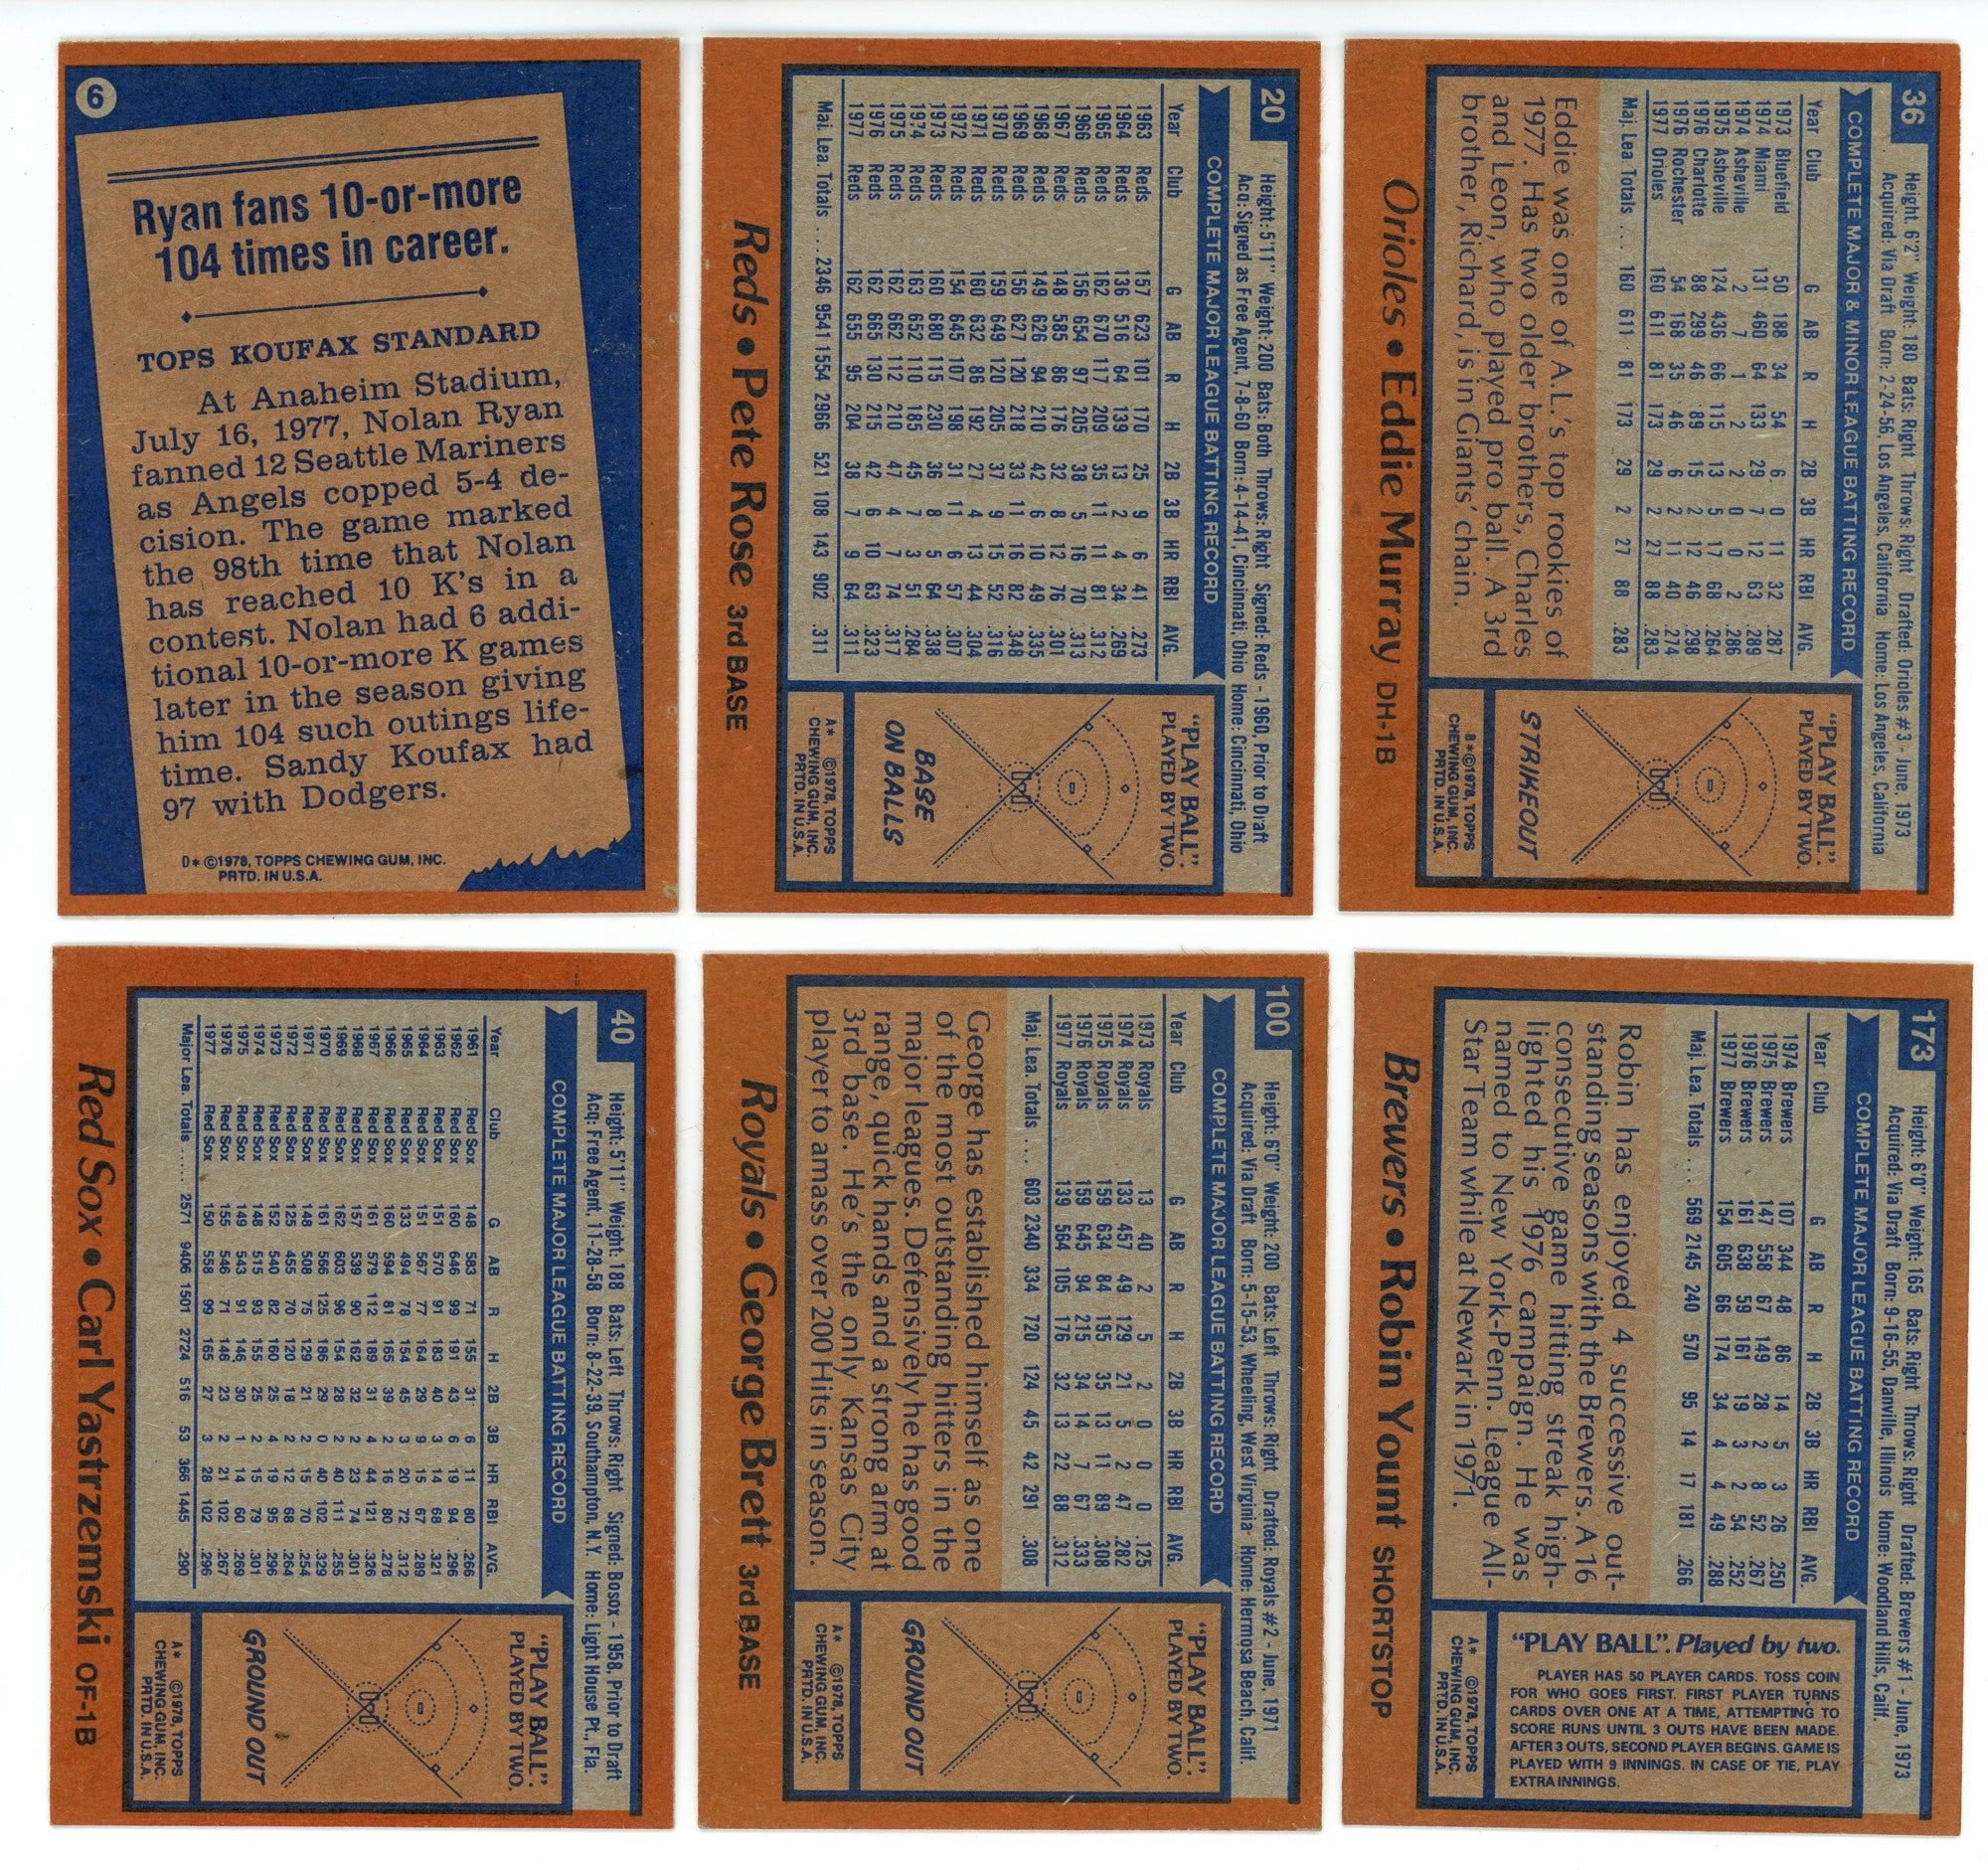 Sold at Auction: 25 Different 1978 Topps Baseball Cards - J.R.